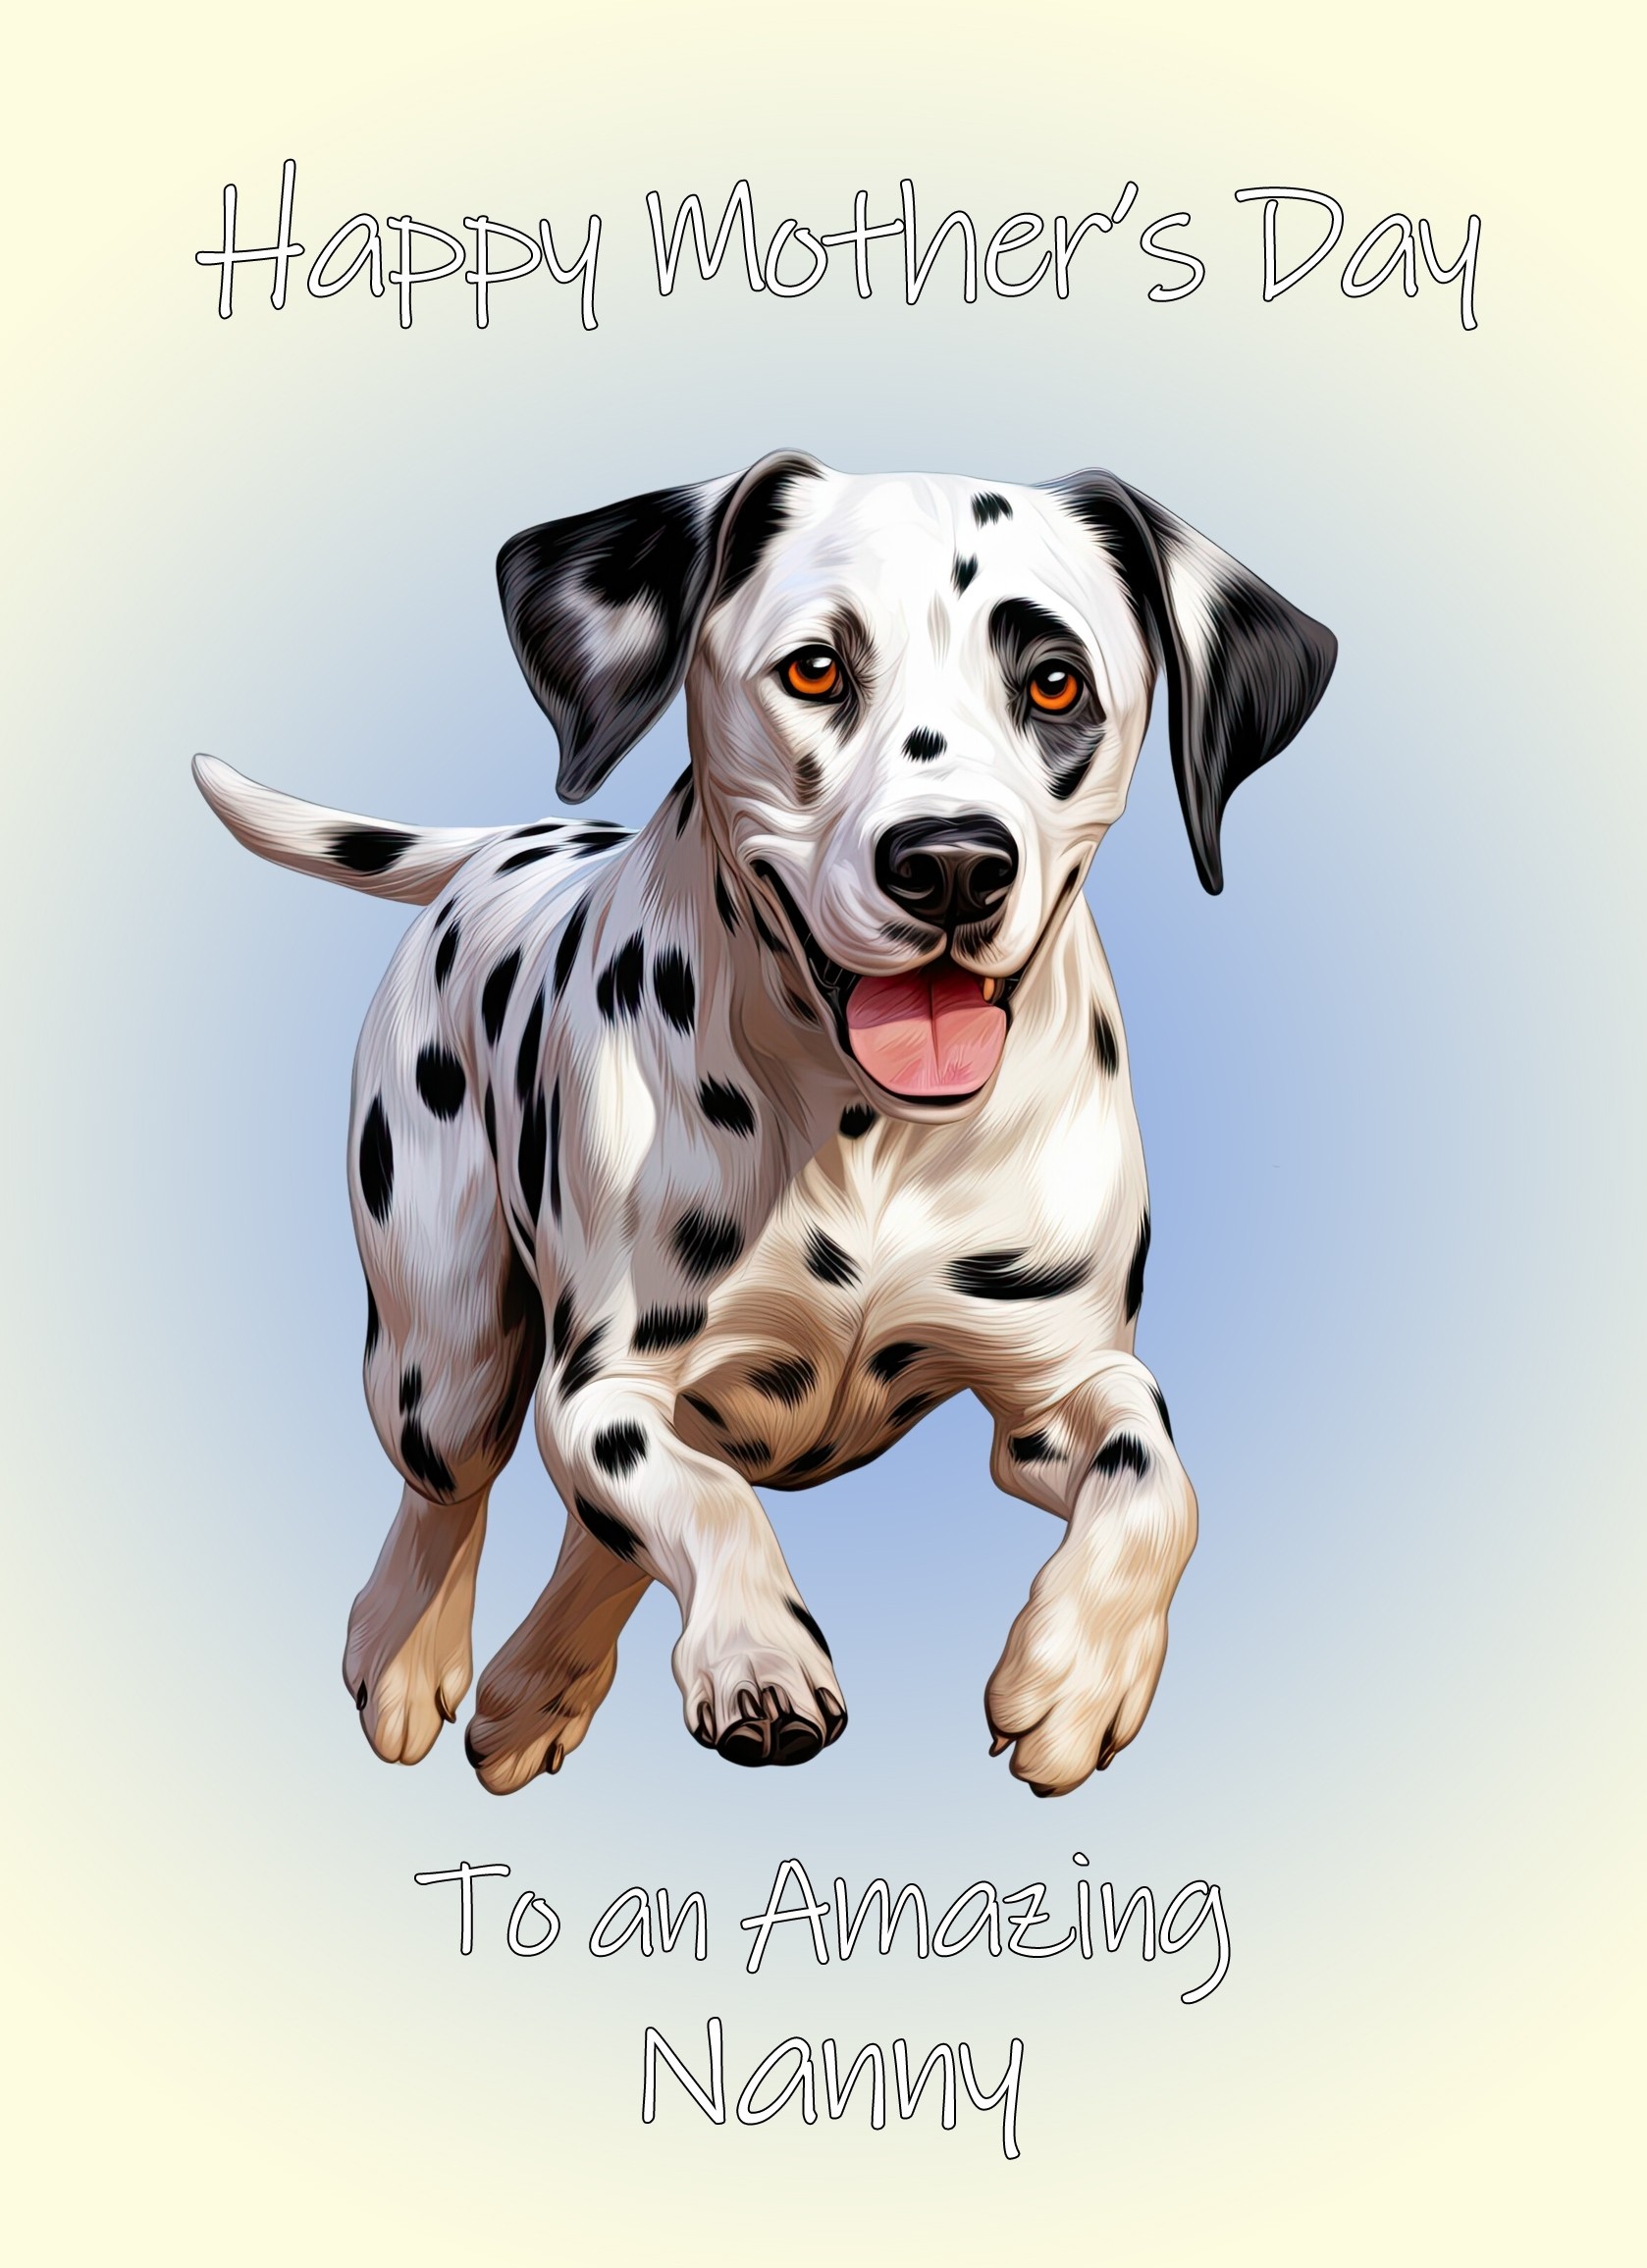 Dalmatian Dog Mothers Day Card For Nanny